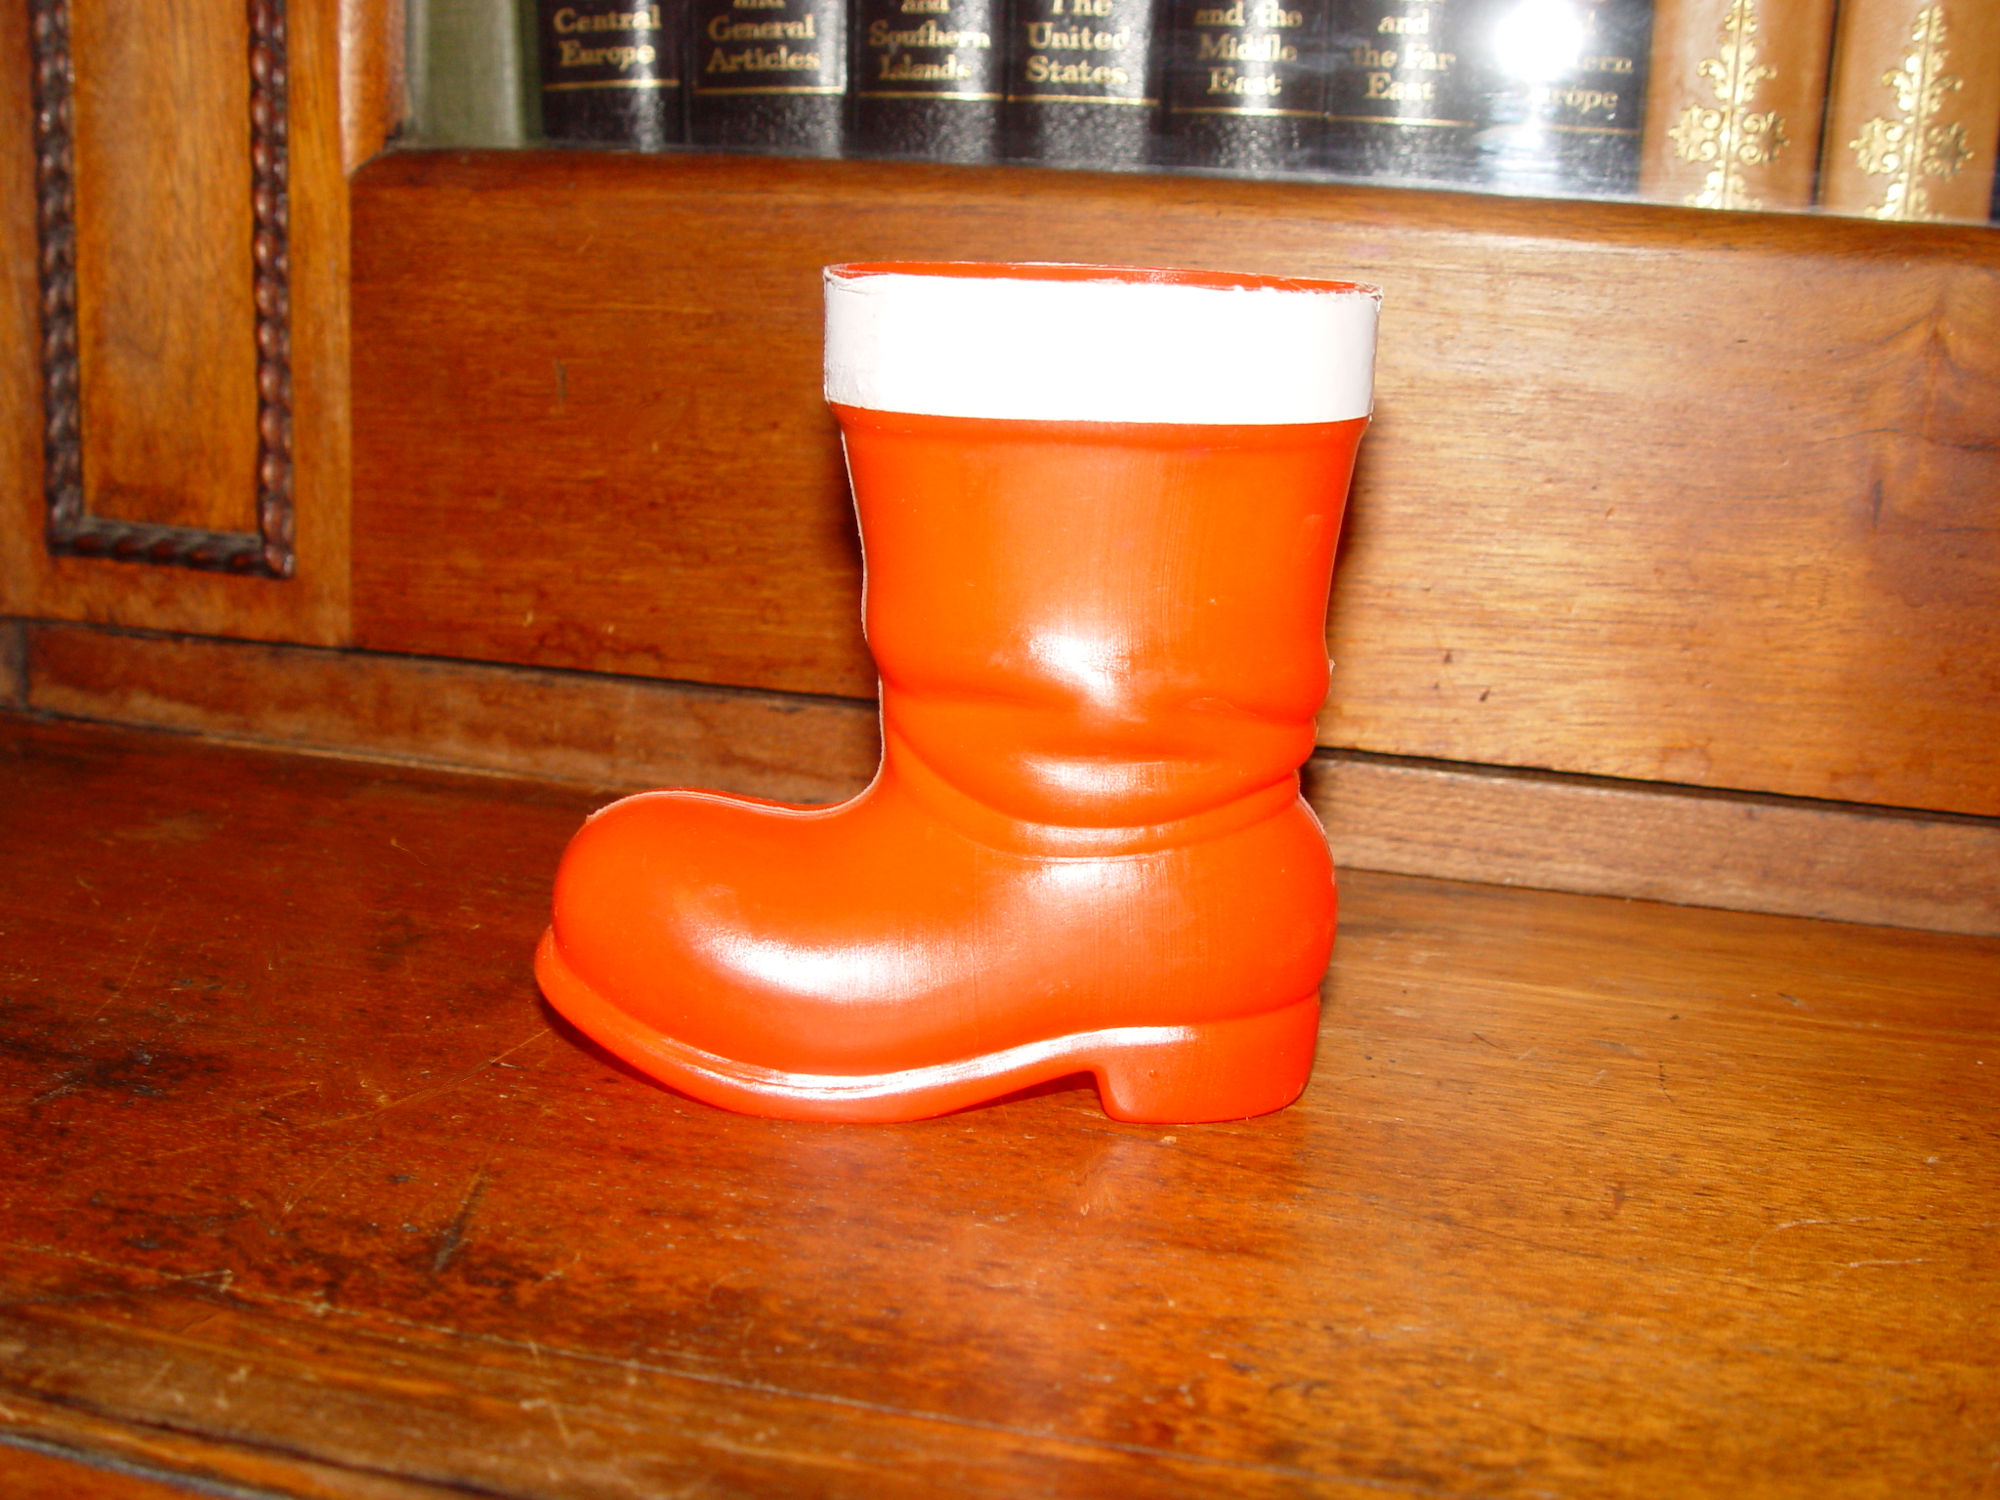 1960's Santa Boot,
                                        Christmas Candy Container, Hard
                                        Plastic, RTC